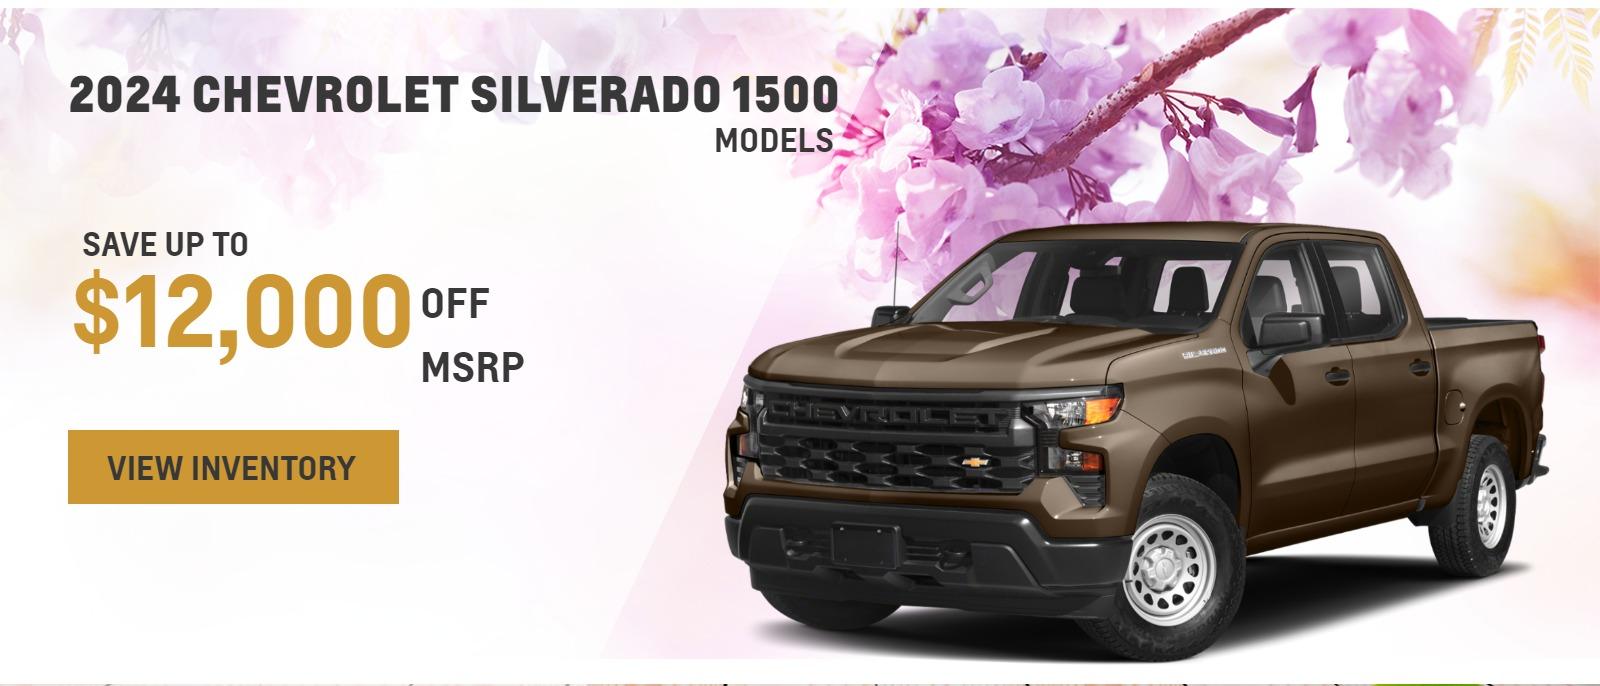 SAVE UP TO $12000 OFF MSRP